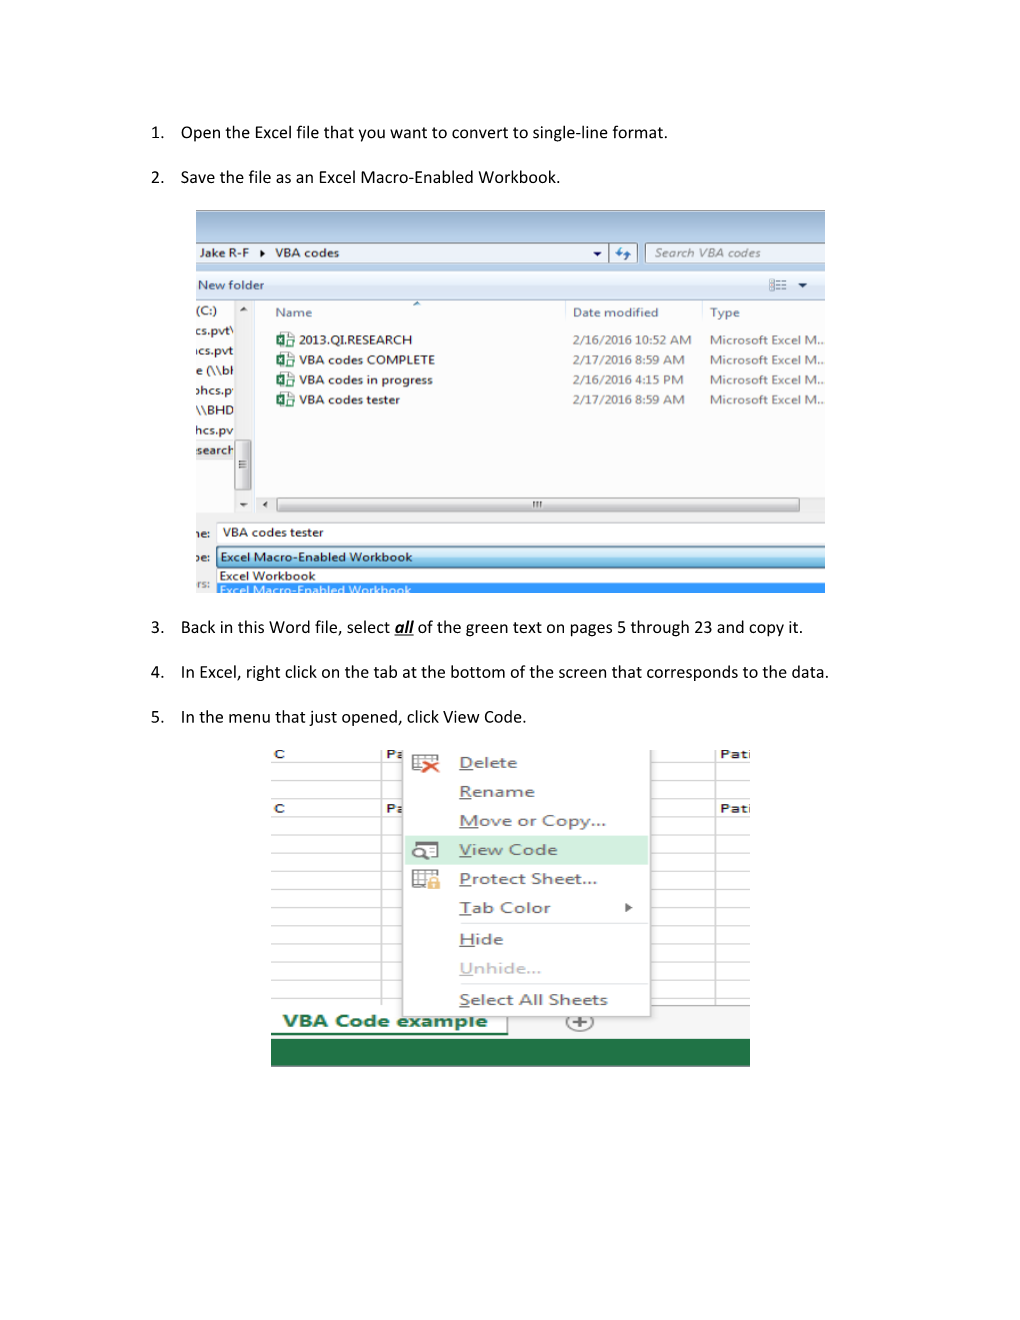 Open the Excel File That You Want to Convert to Single-Line Format